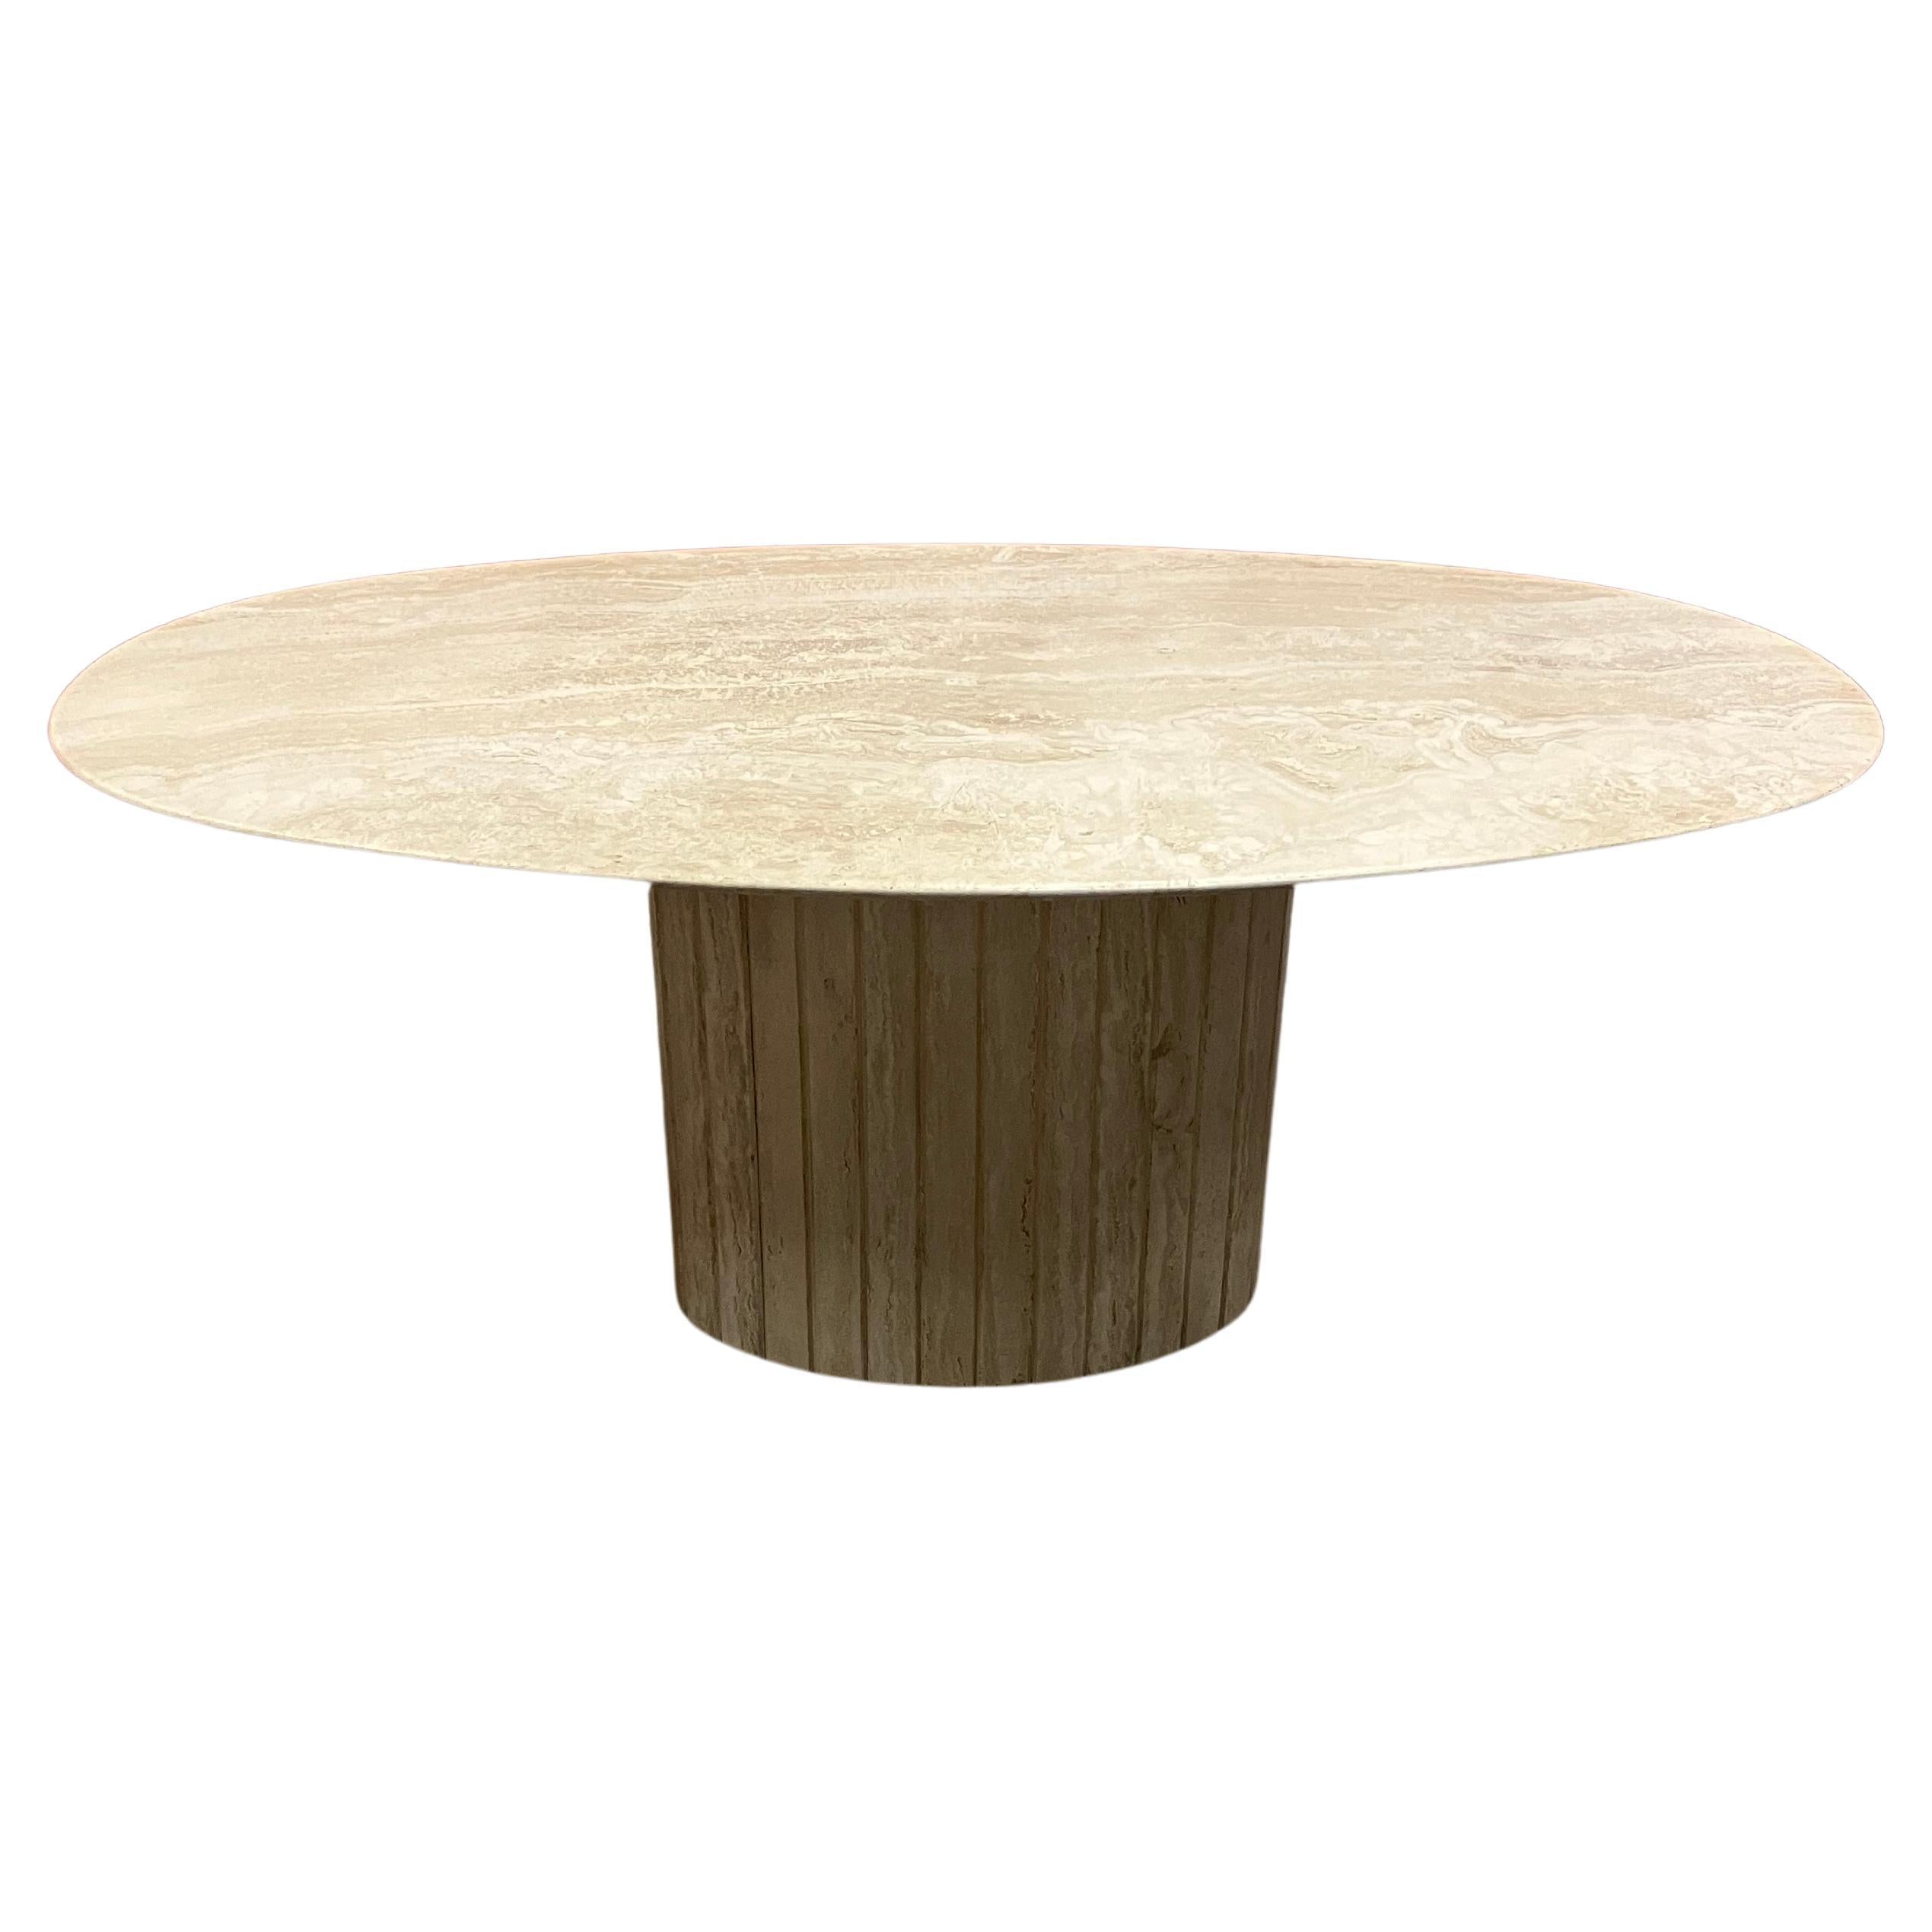 Oval Travertine Marble Dining table 180 x 100 x 73